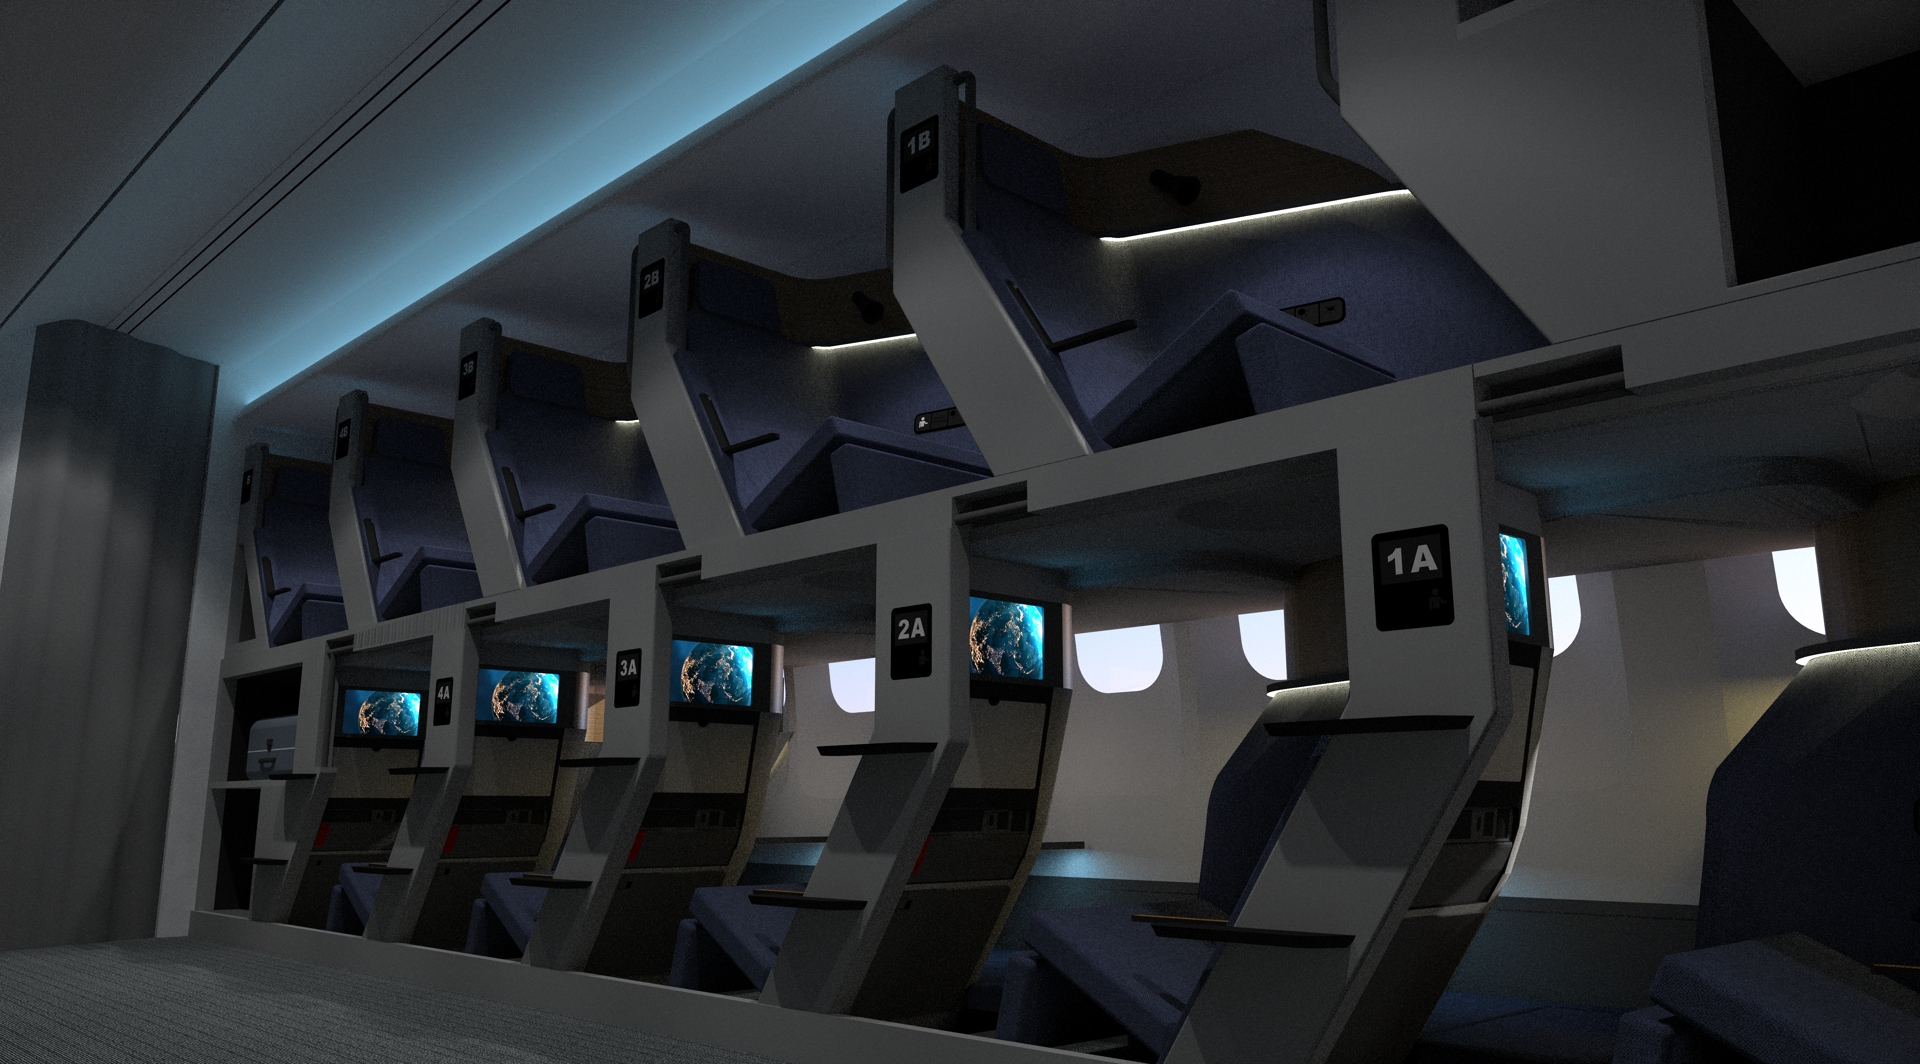 zephyr seat is a lie-flat airline seat for economy class travelers